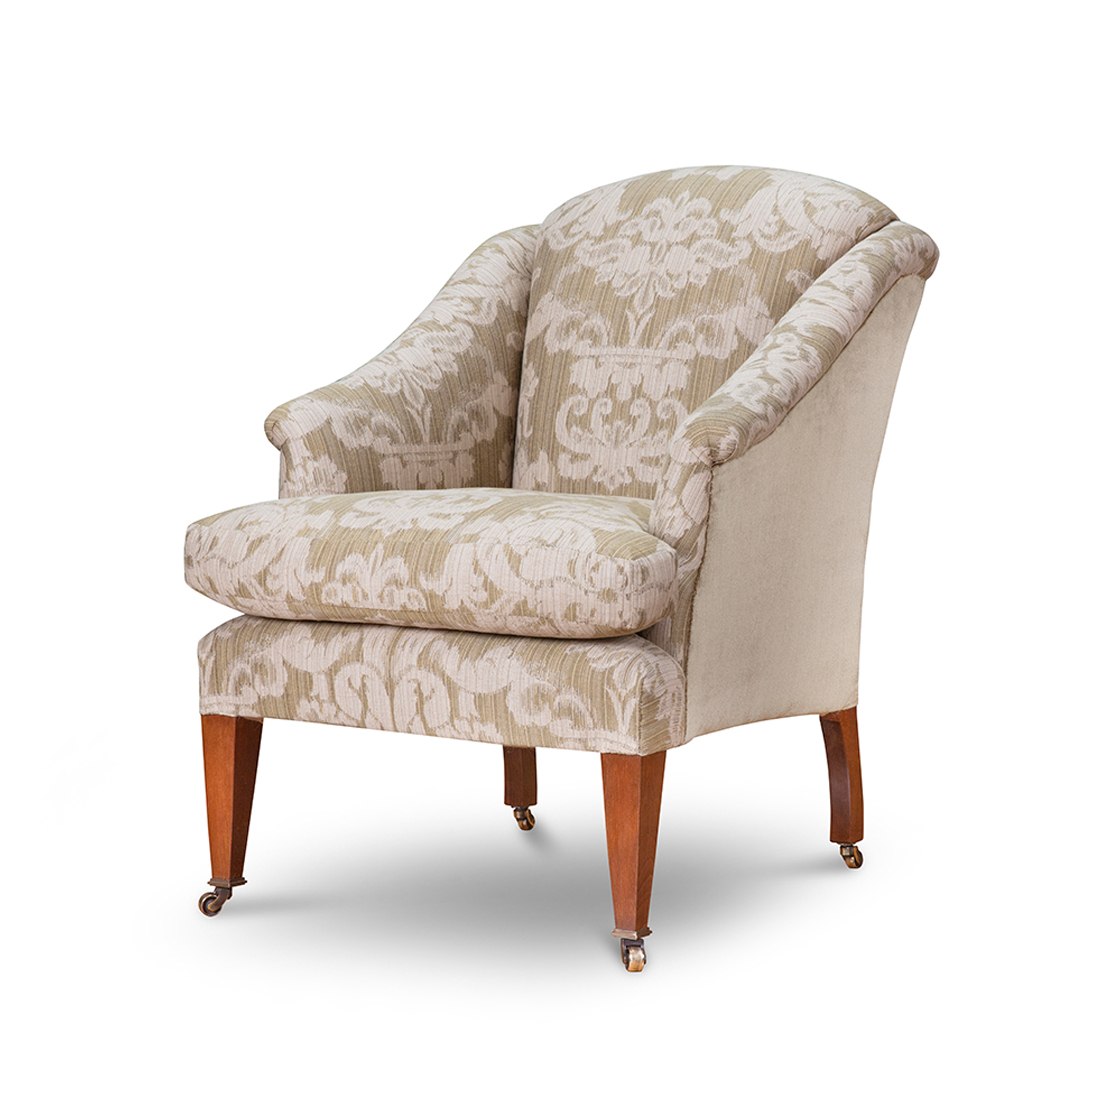 Fielding chair in Wicklow-Gorse and Capri-French grey - Beaumont & Fletcher